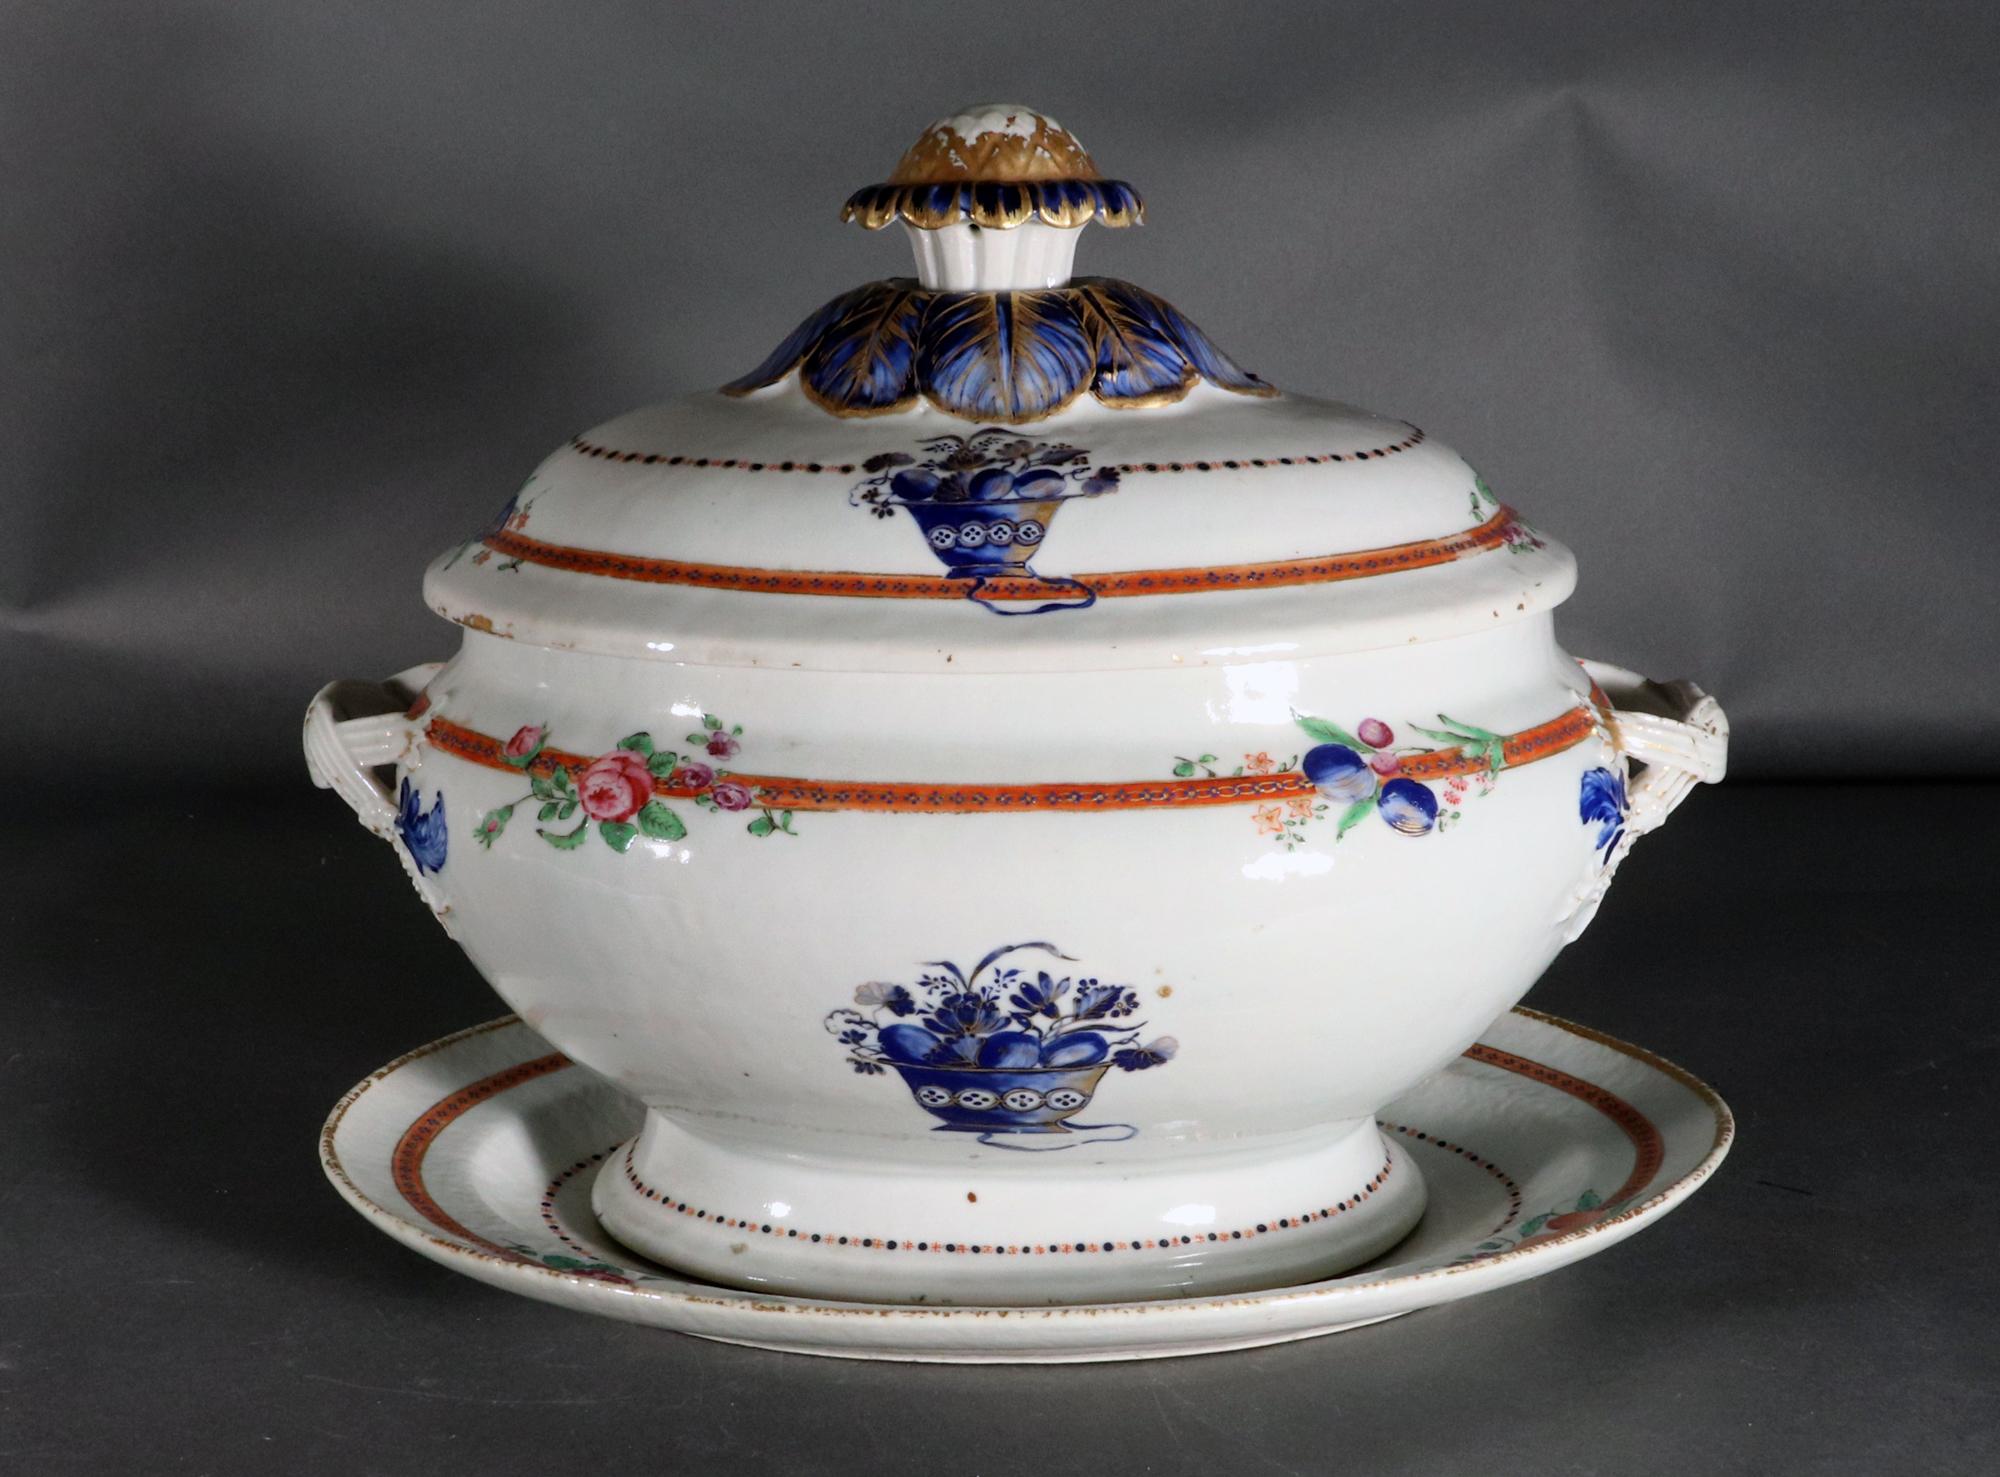 Chinese Export Porcelain American Market Soup Tureen and Cover and Stand,
Circa 1780.

The Chinese Export porcelain bombe-form soup tureen, cover and stand is painted with blue enamel and gold baskets to front and back on the tureen and the cover. 